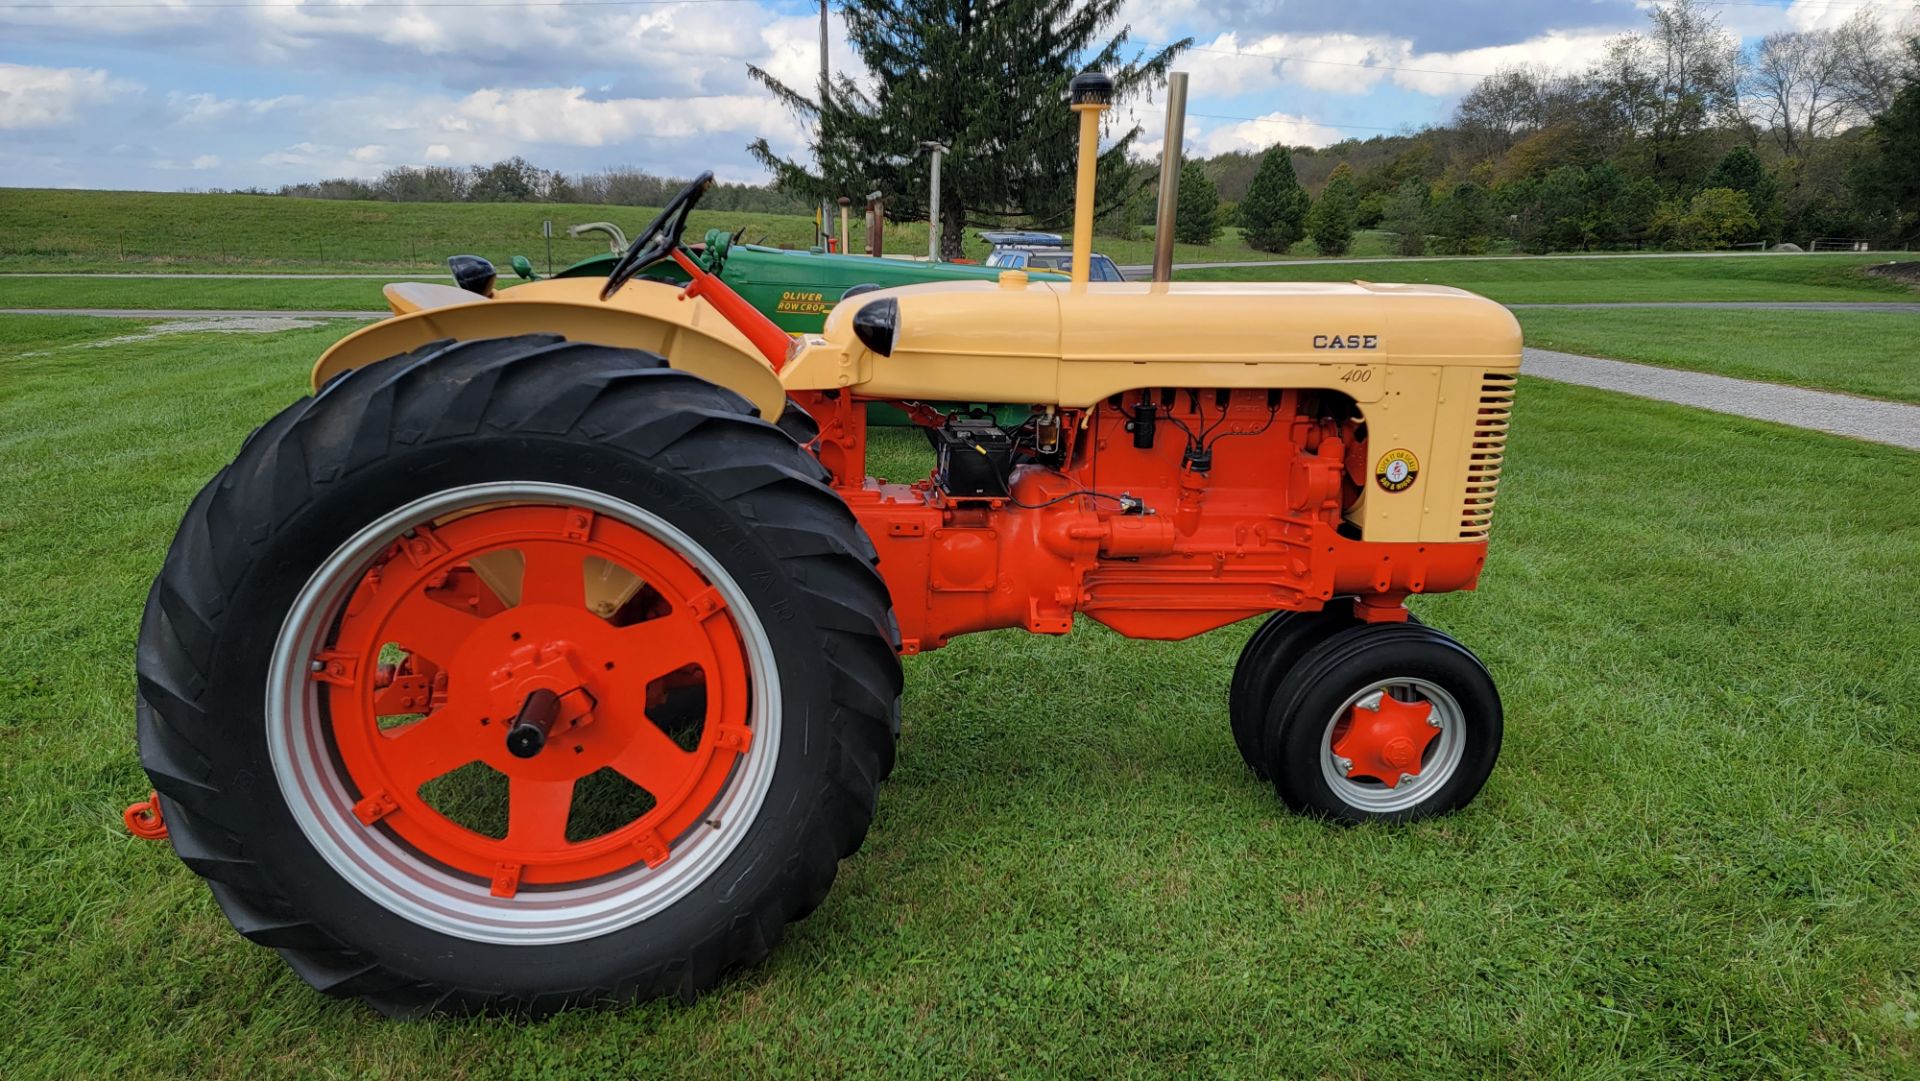 1956 Case 400 Row Crop Tractor, Model 411, s/n 8081224, Gasoline Engine, New in 1956, Restored - Image 20 of 32